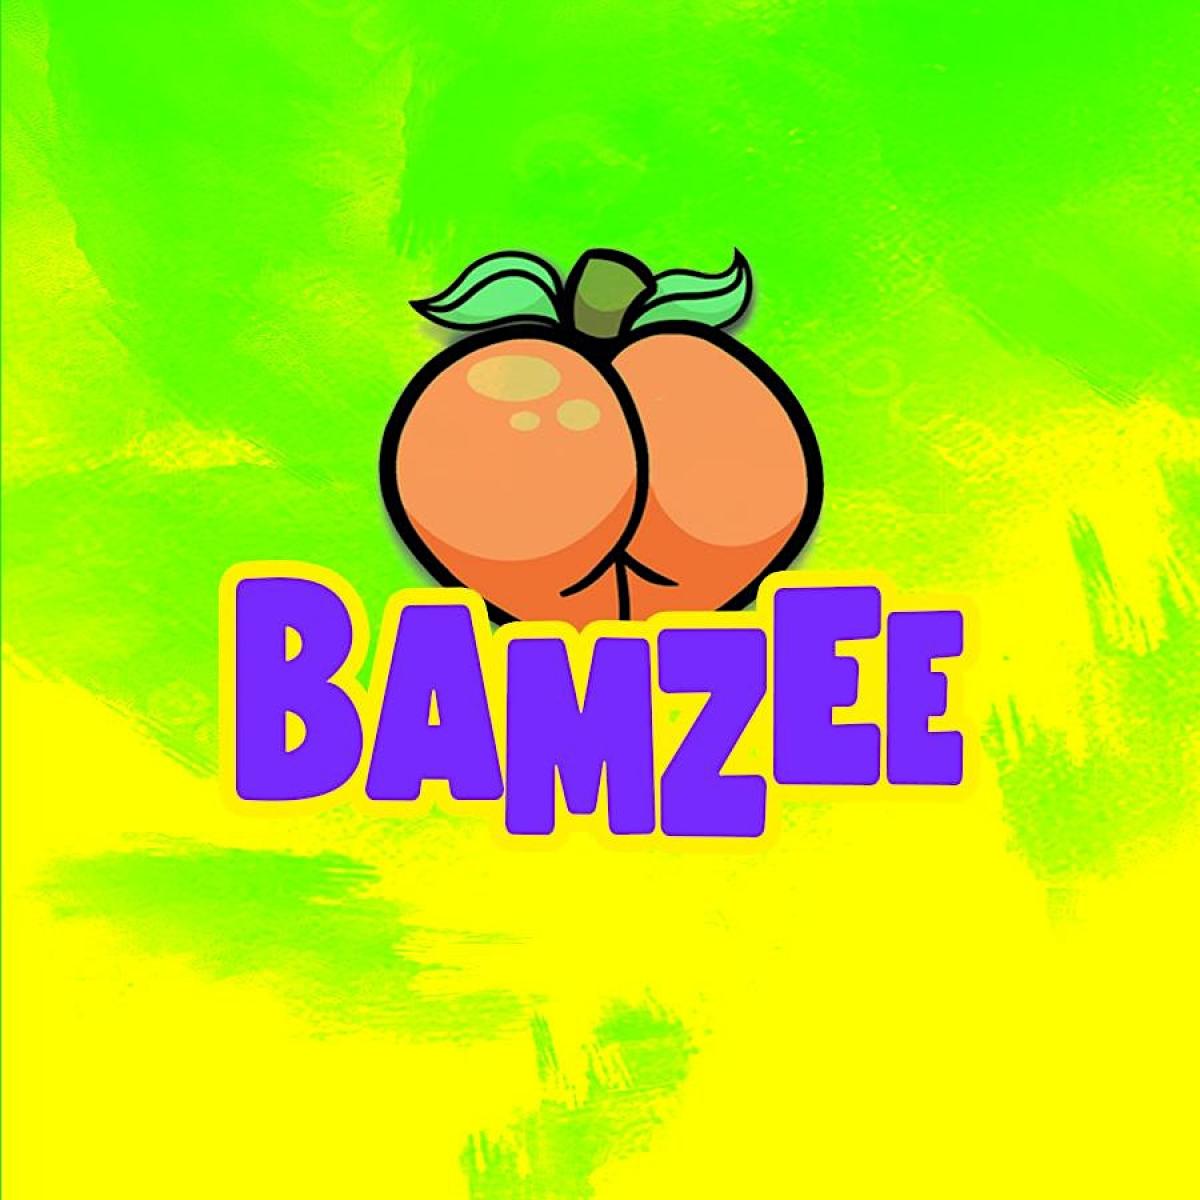 Bamzee Day Fete flyer or graphic.